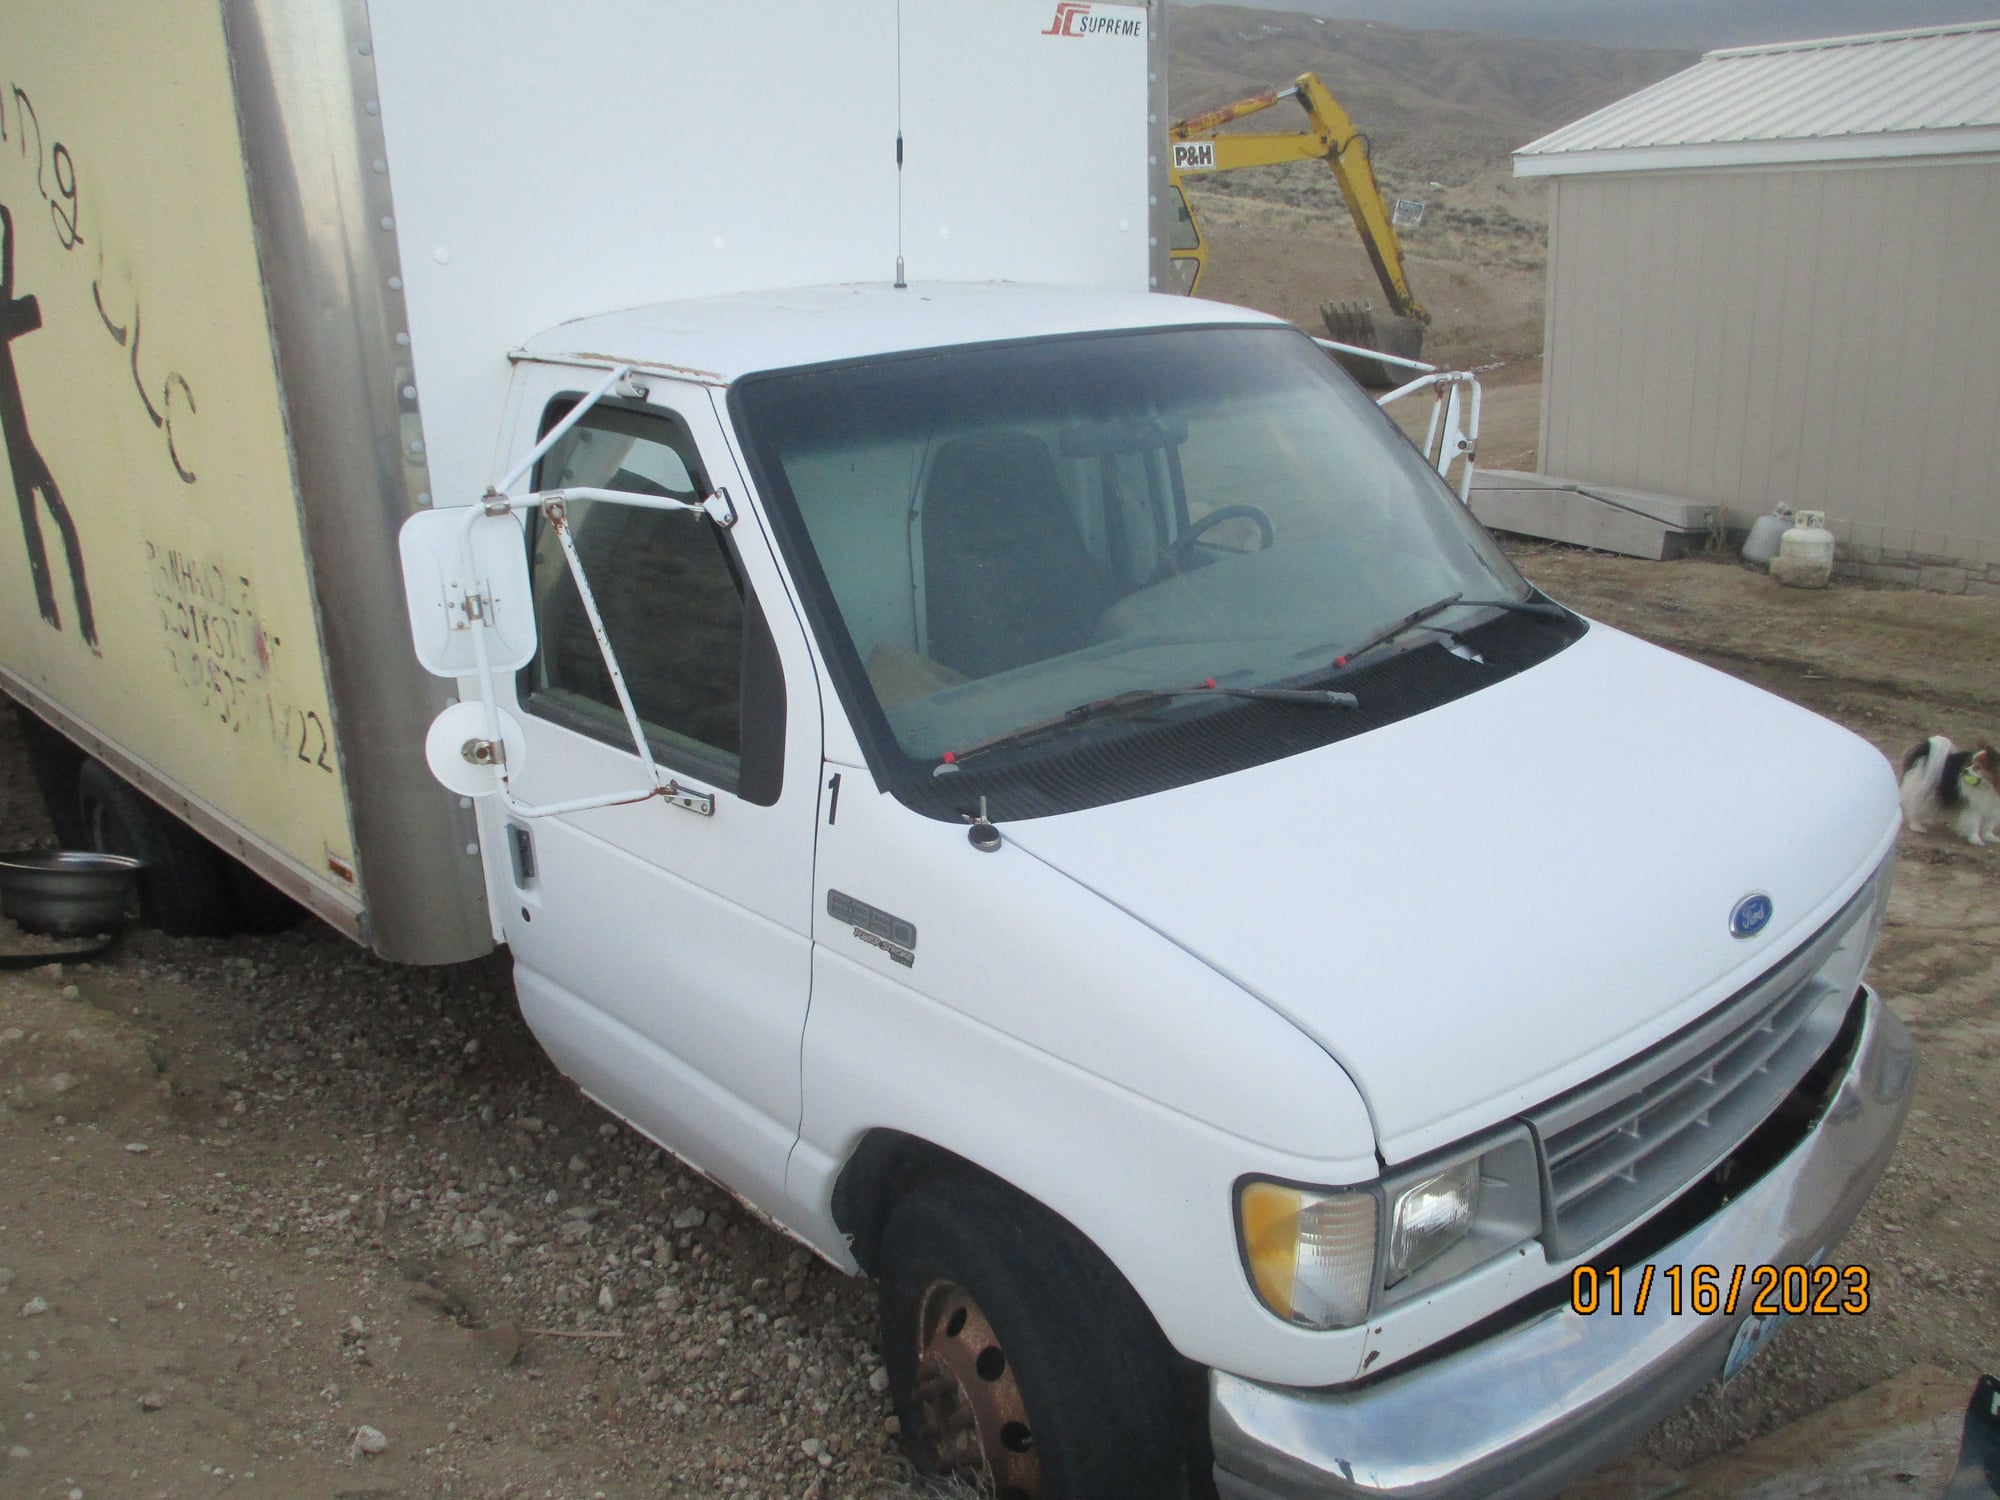 1995 Ford E-350 Econoline - E-350 PSD Service Van - Used - VIN 1FDKE37FXSHB86314 - 366,597 Miles - 8 cyl - 2WD - Automatic - Van - White - Cody, WY 82414, United States